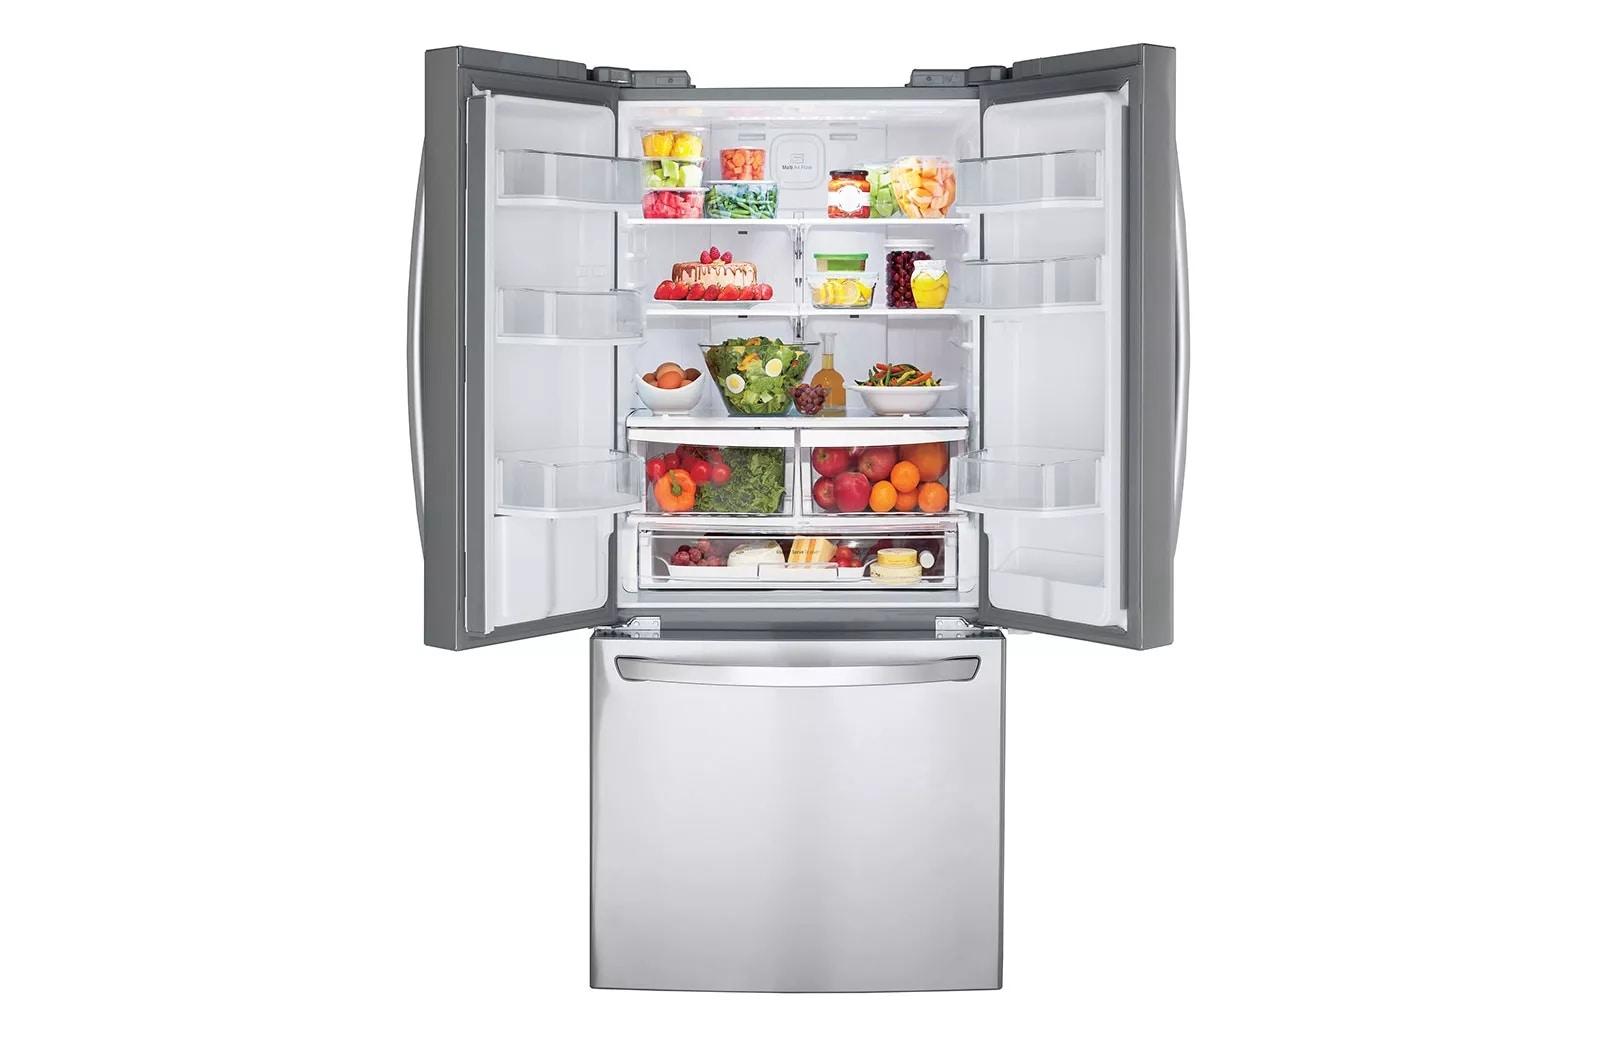 LG LFDS22520S 22 Cu. Ft. Stainless French Door Refrigerator - image 4 of 5